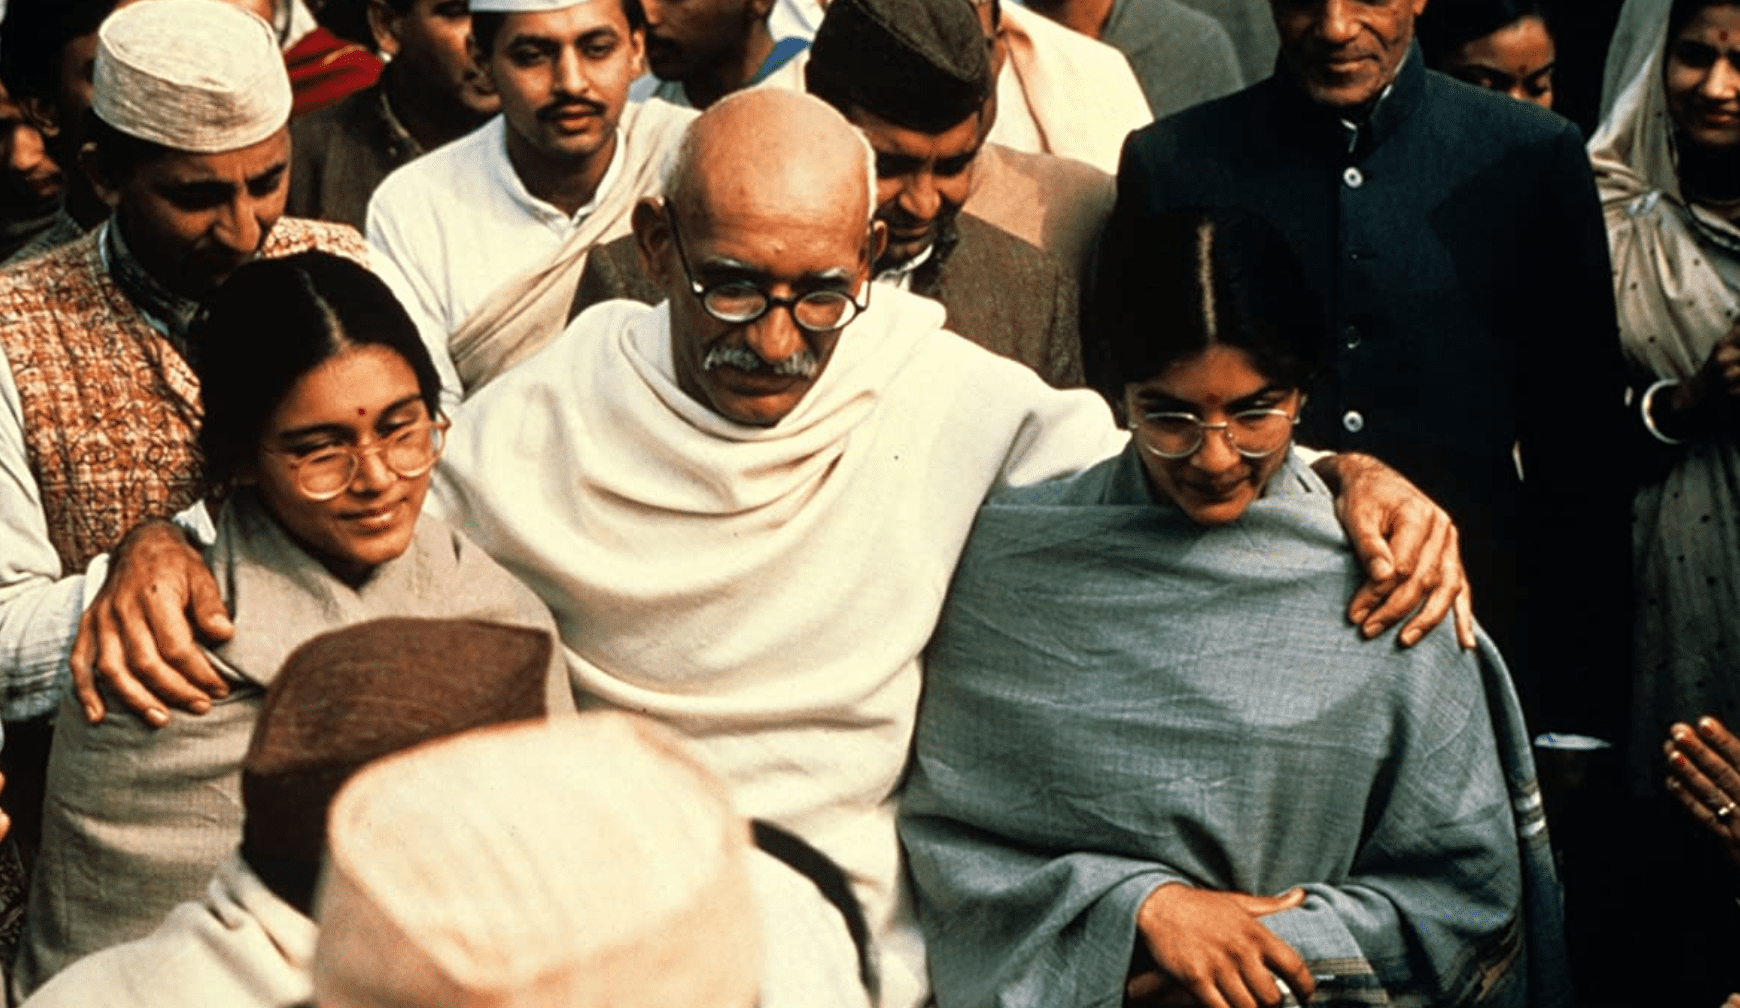 Ben Kingsley, playing Gandhi, embraces two female supporters